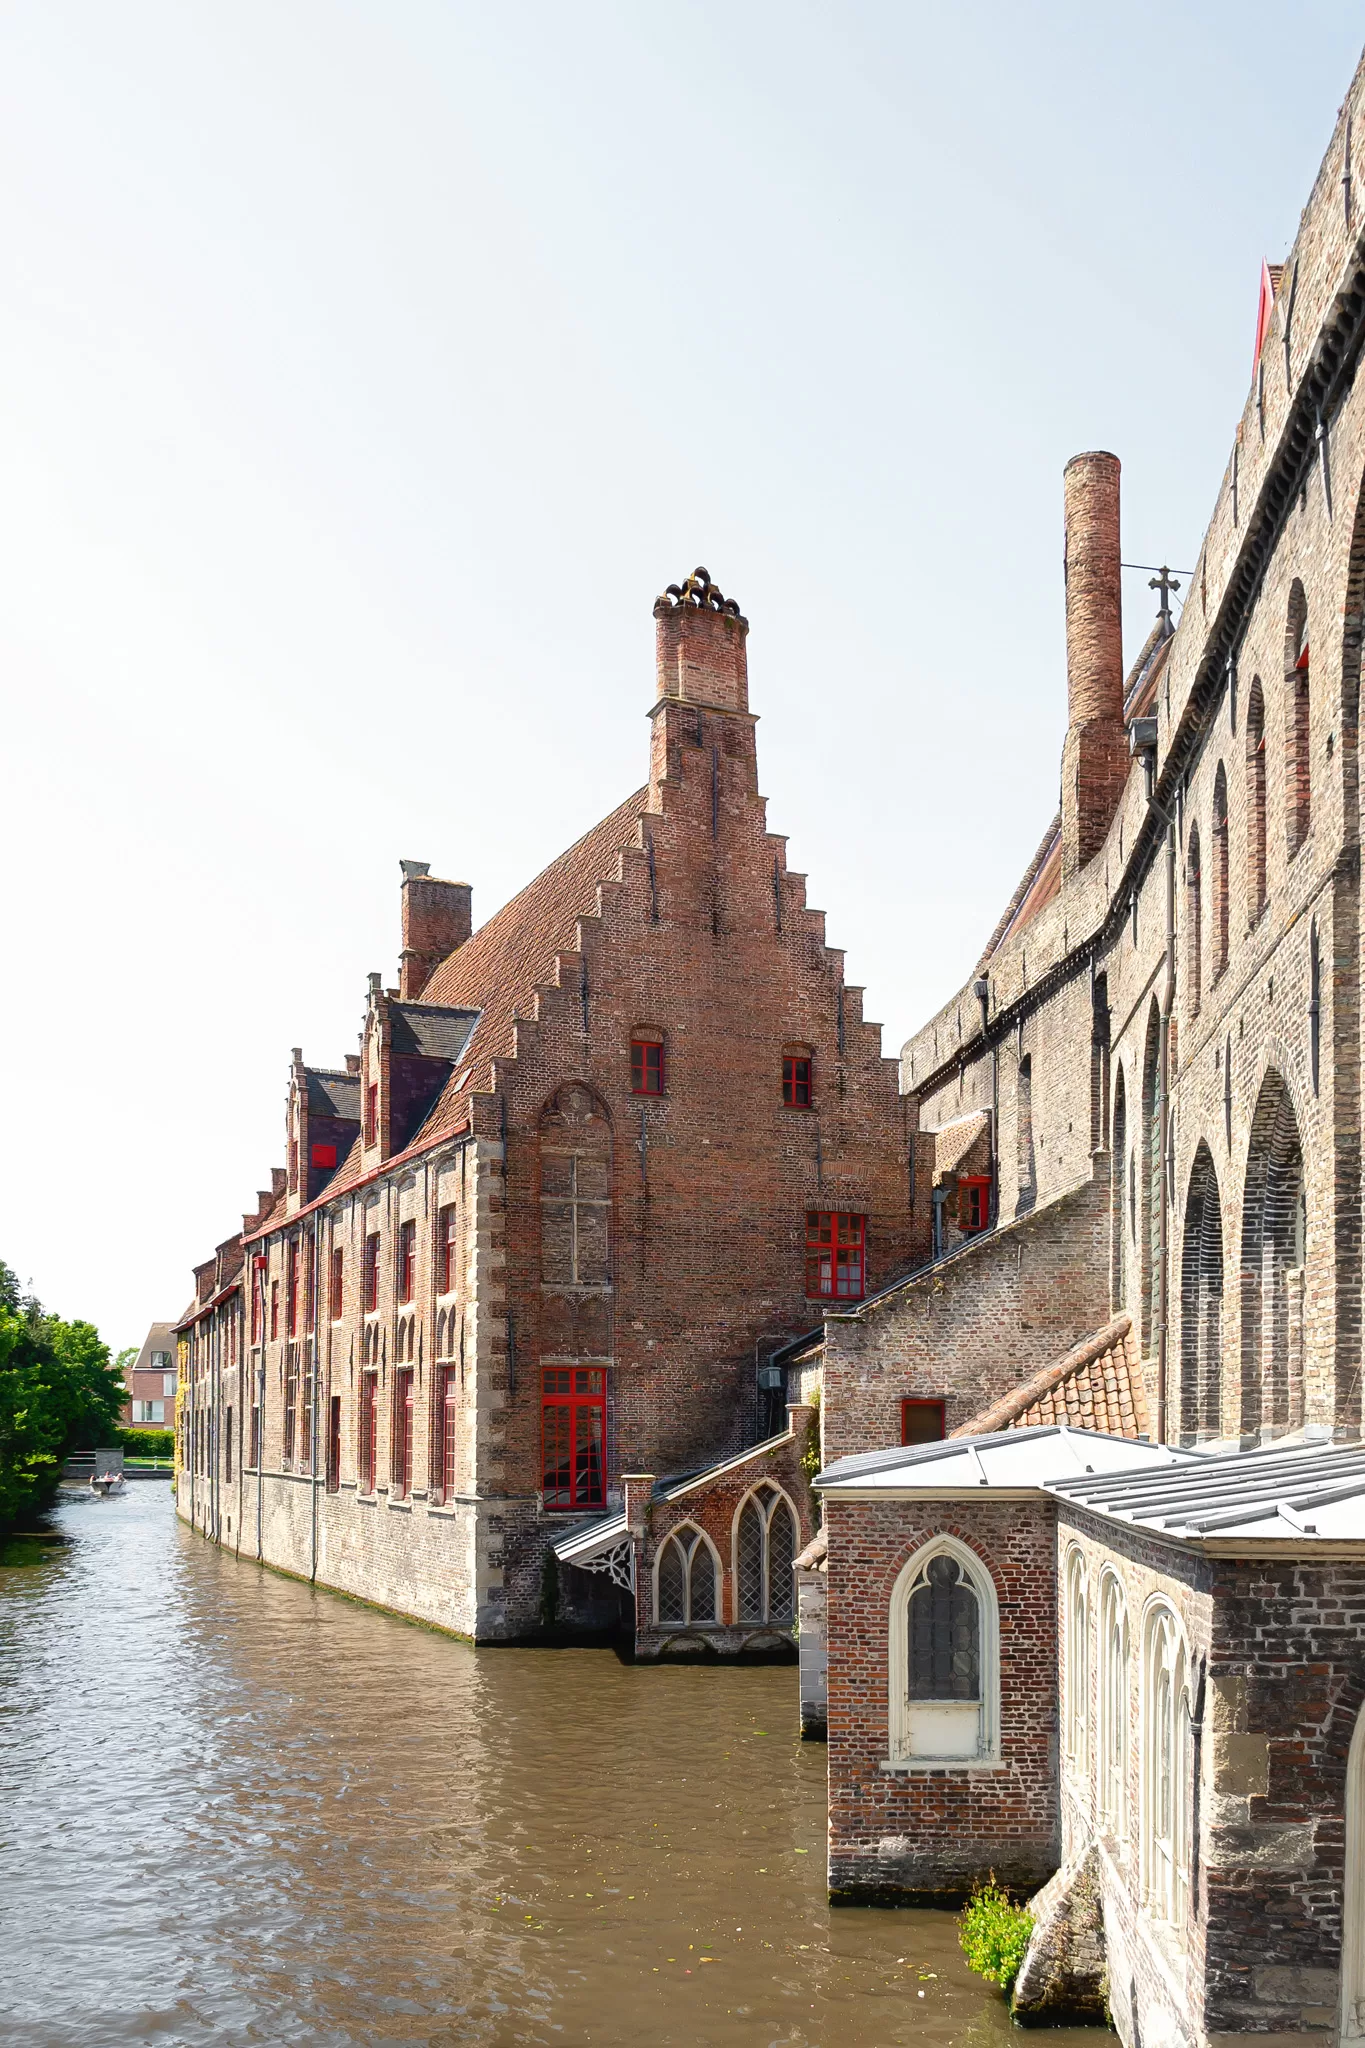 Bruges historic architecture along the canals